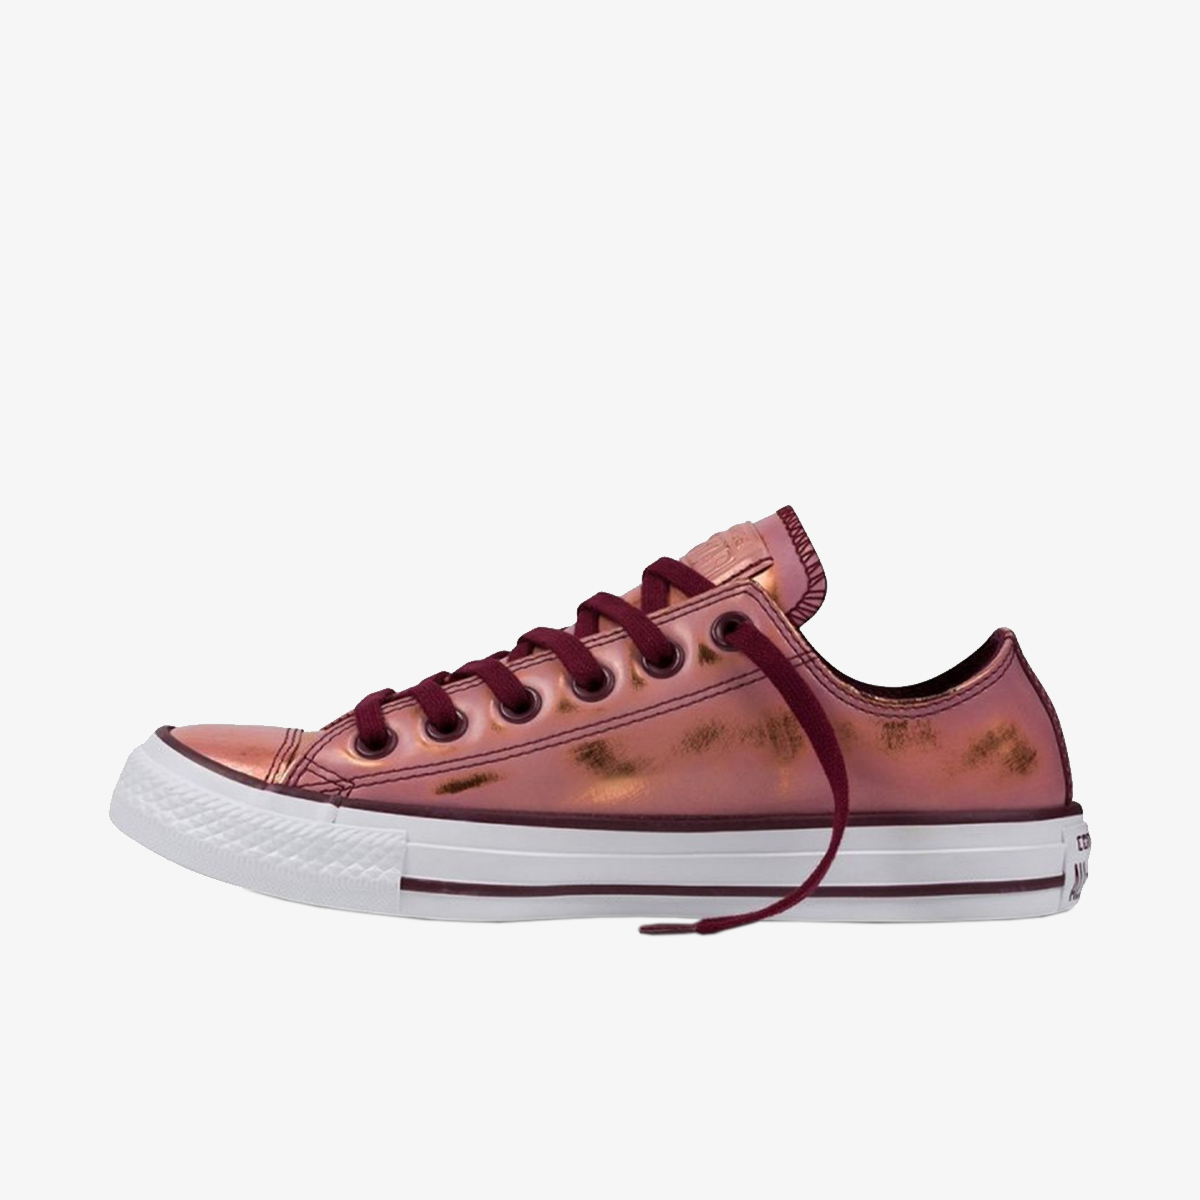 CONVERSE Patike CHUCK TAYLOR ALL STAR BRUSH OFF LEATHER 